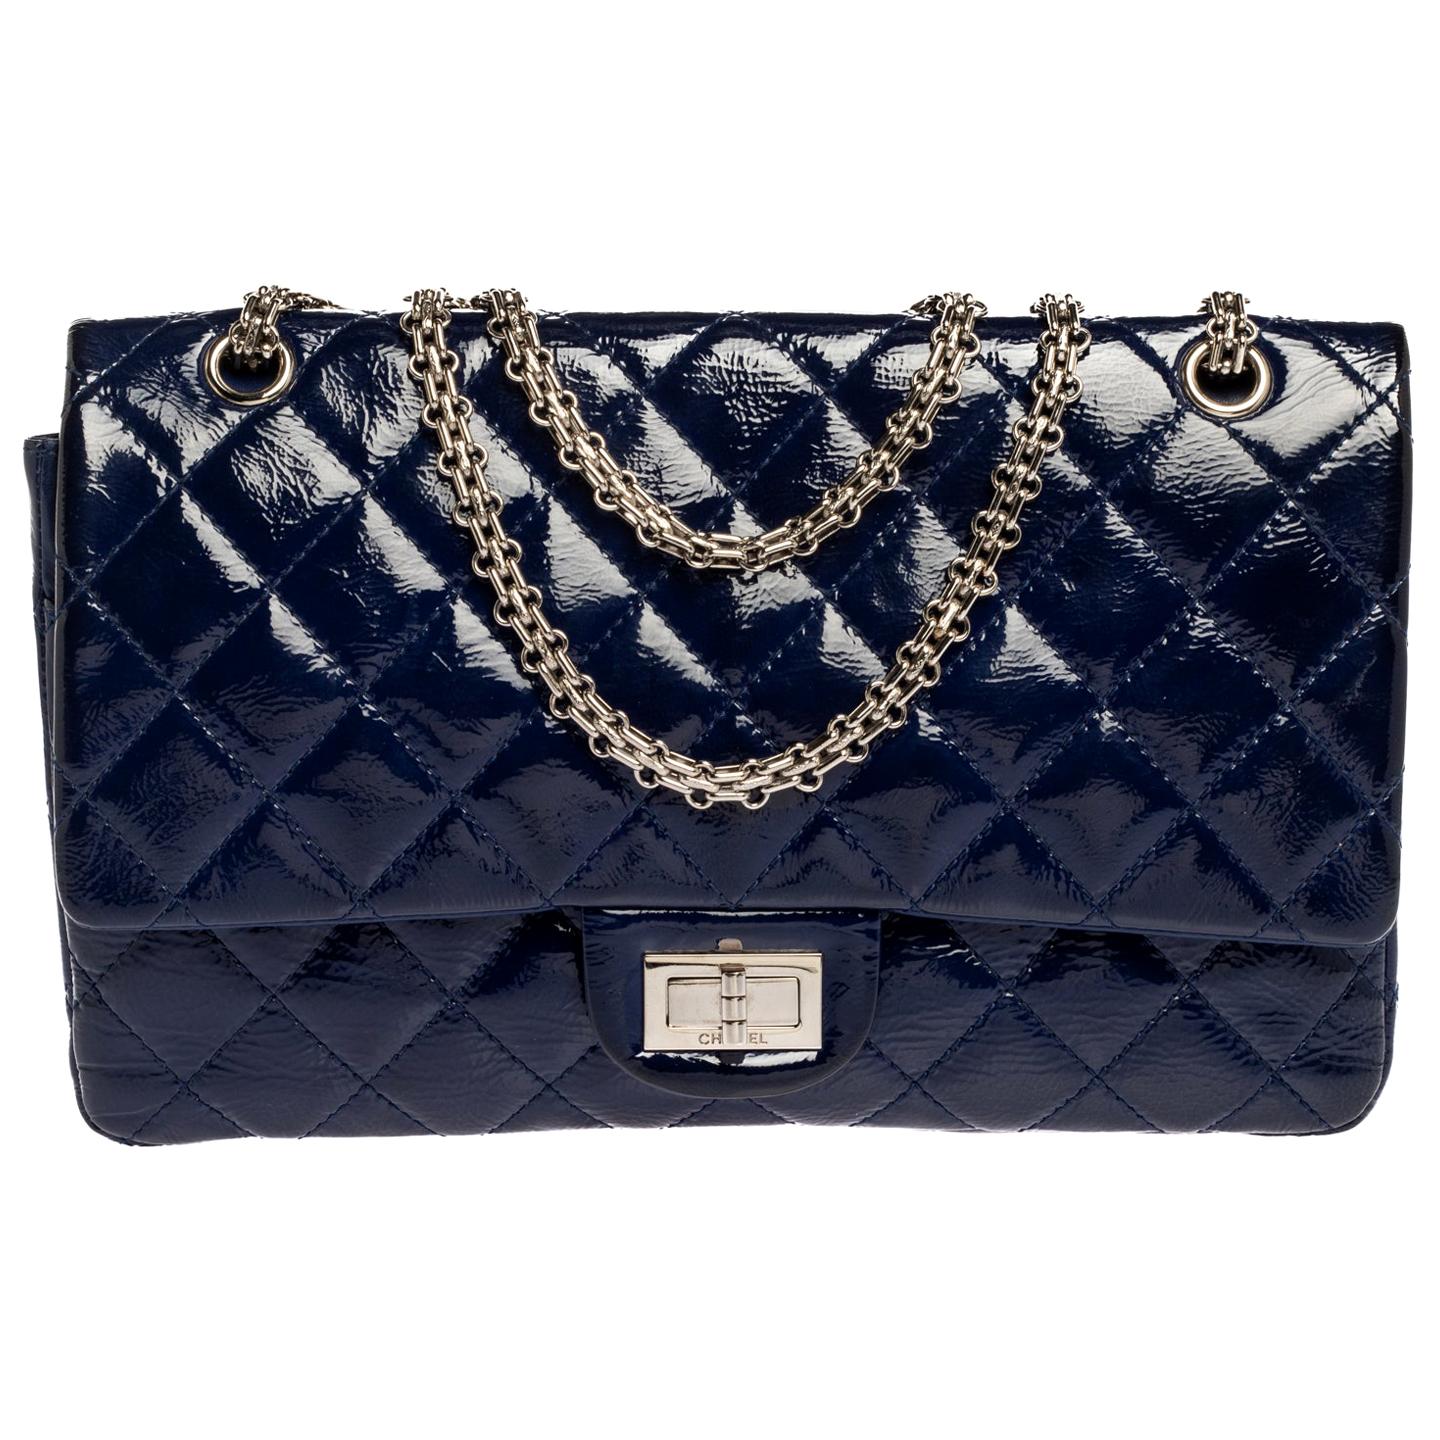 Chanel Blue Quilted Patent Leather Jumbo Reissue 2.55 Classic 227 Flap Bag